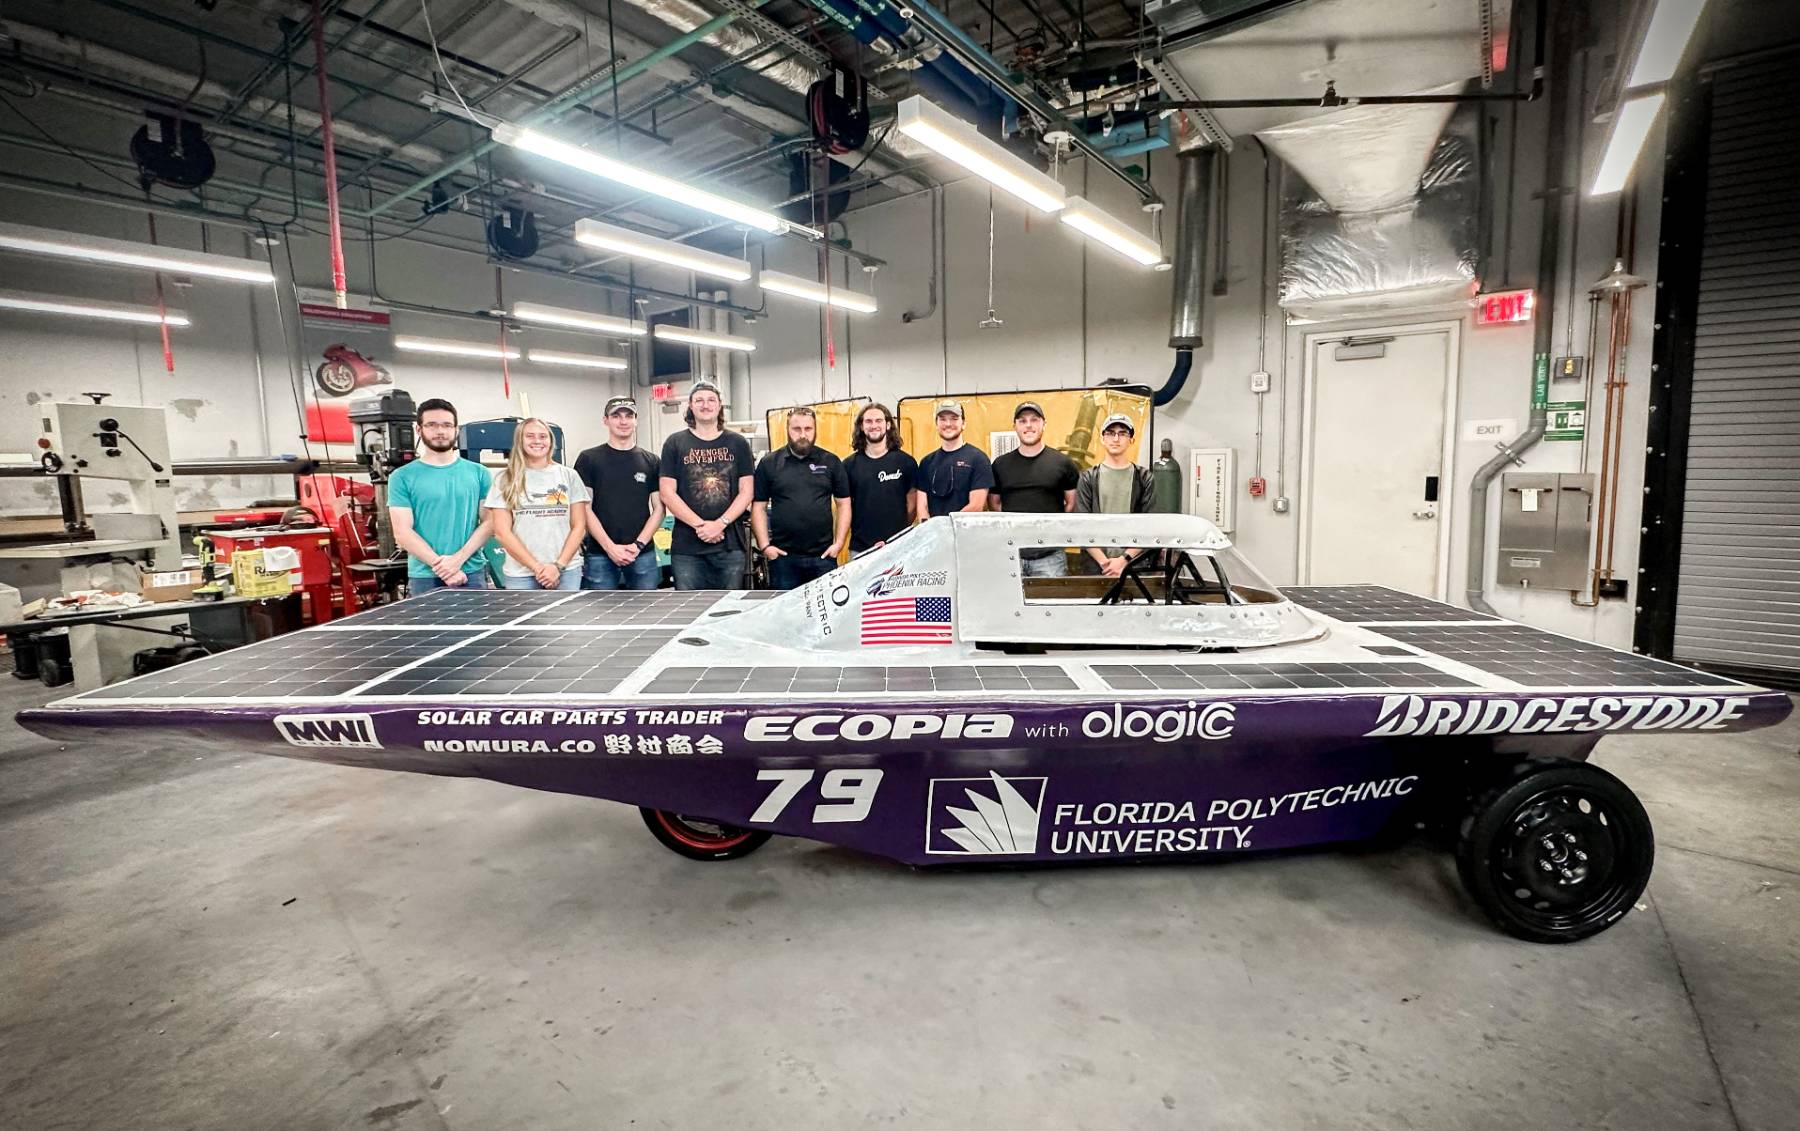 Phoenix Racing Team stands with the solar race car